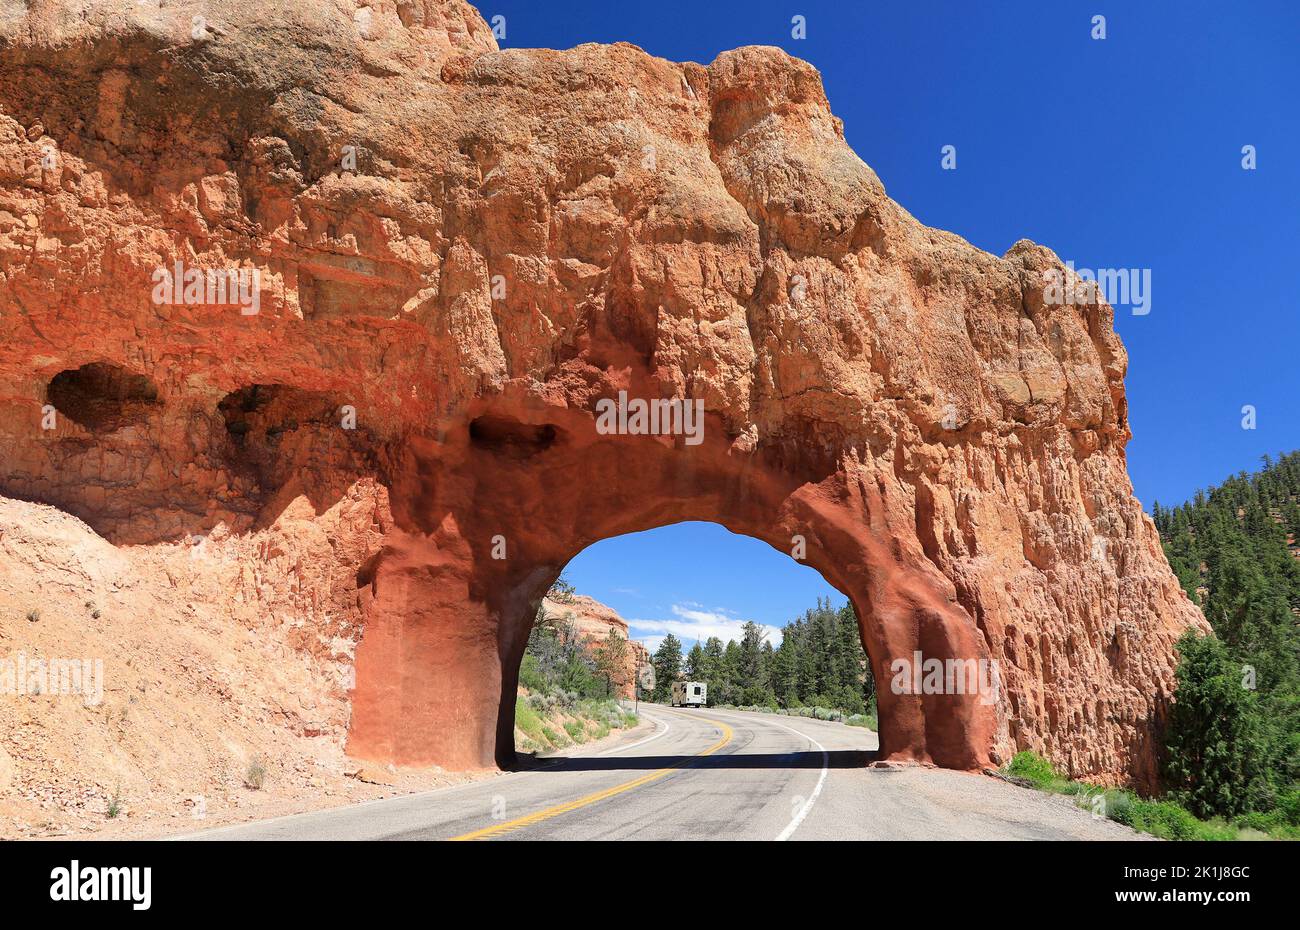 Tunnel road with a home car on the background in Zion Canyon area, Utah, USA Stock Photo